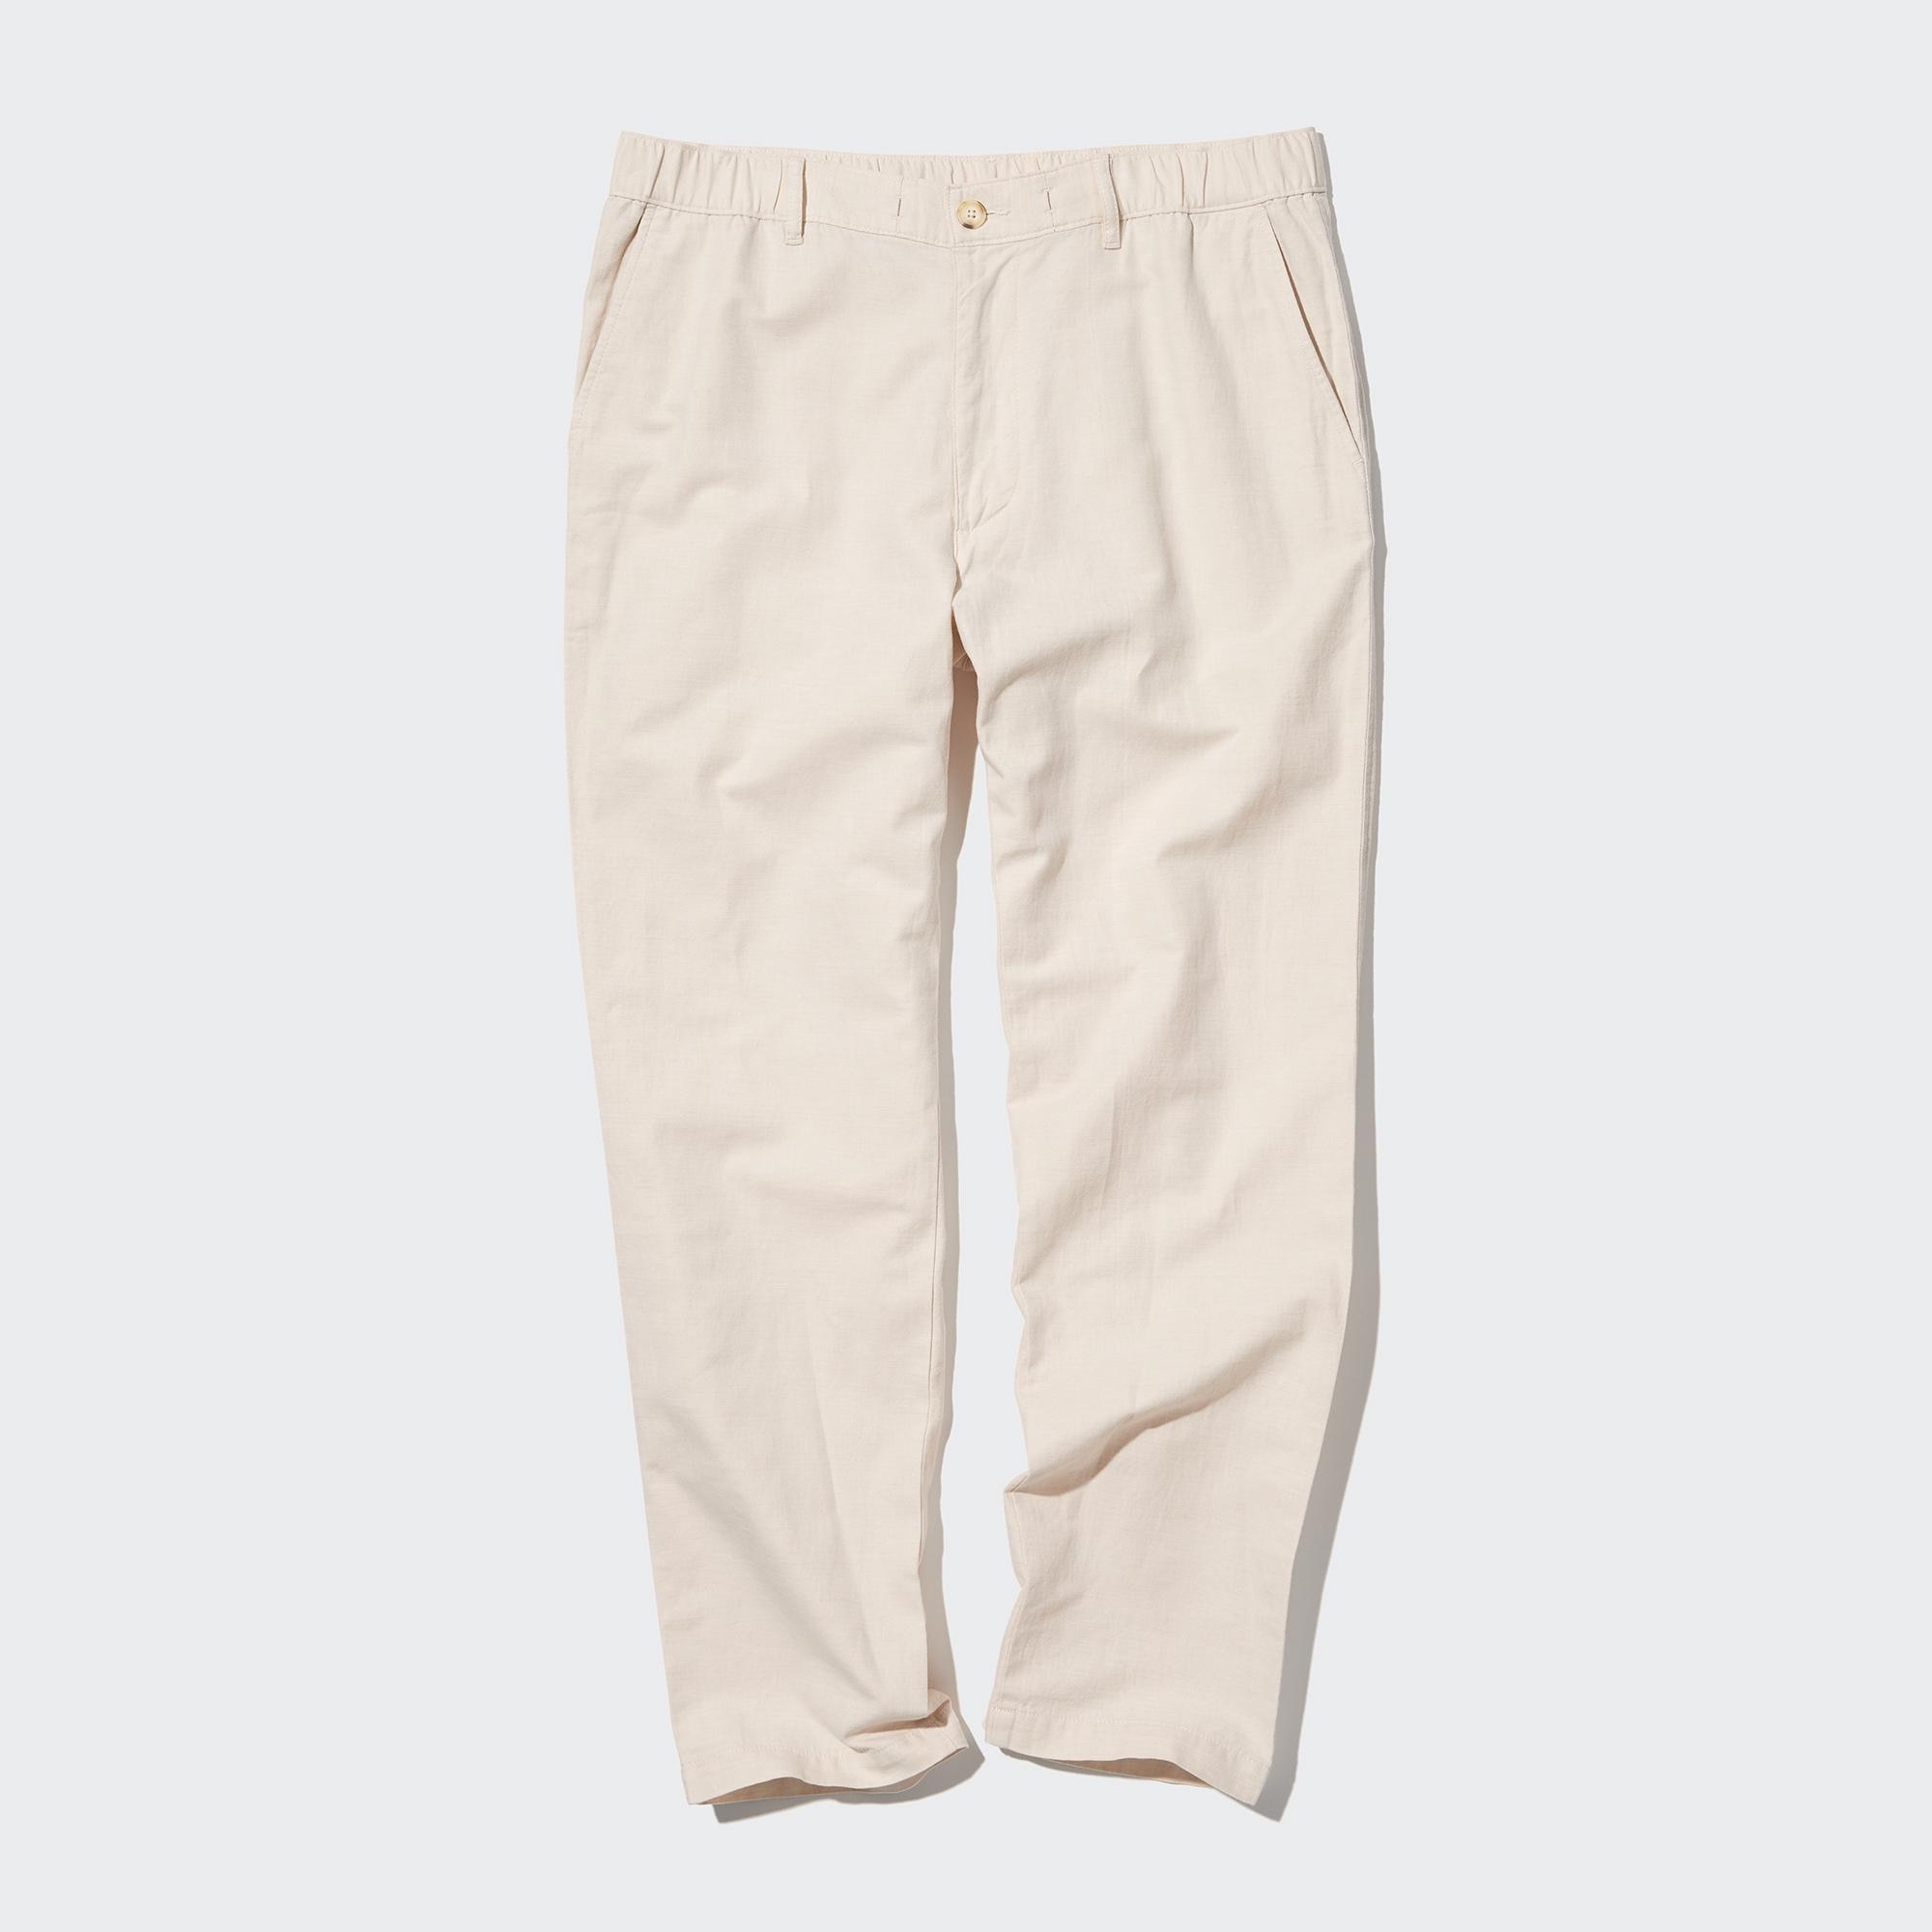 Corneliani Linen and Cotton blend ACADEMY Trousers men - Glamood Outlet